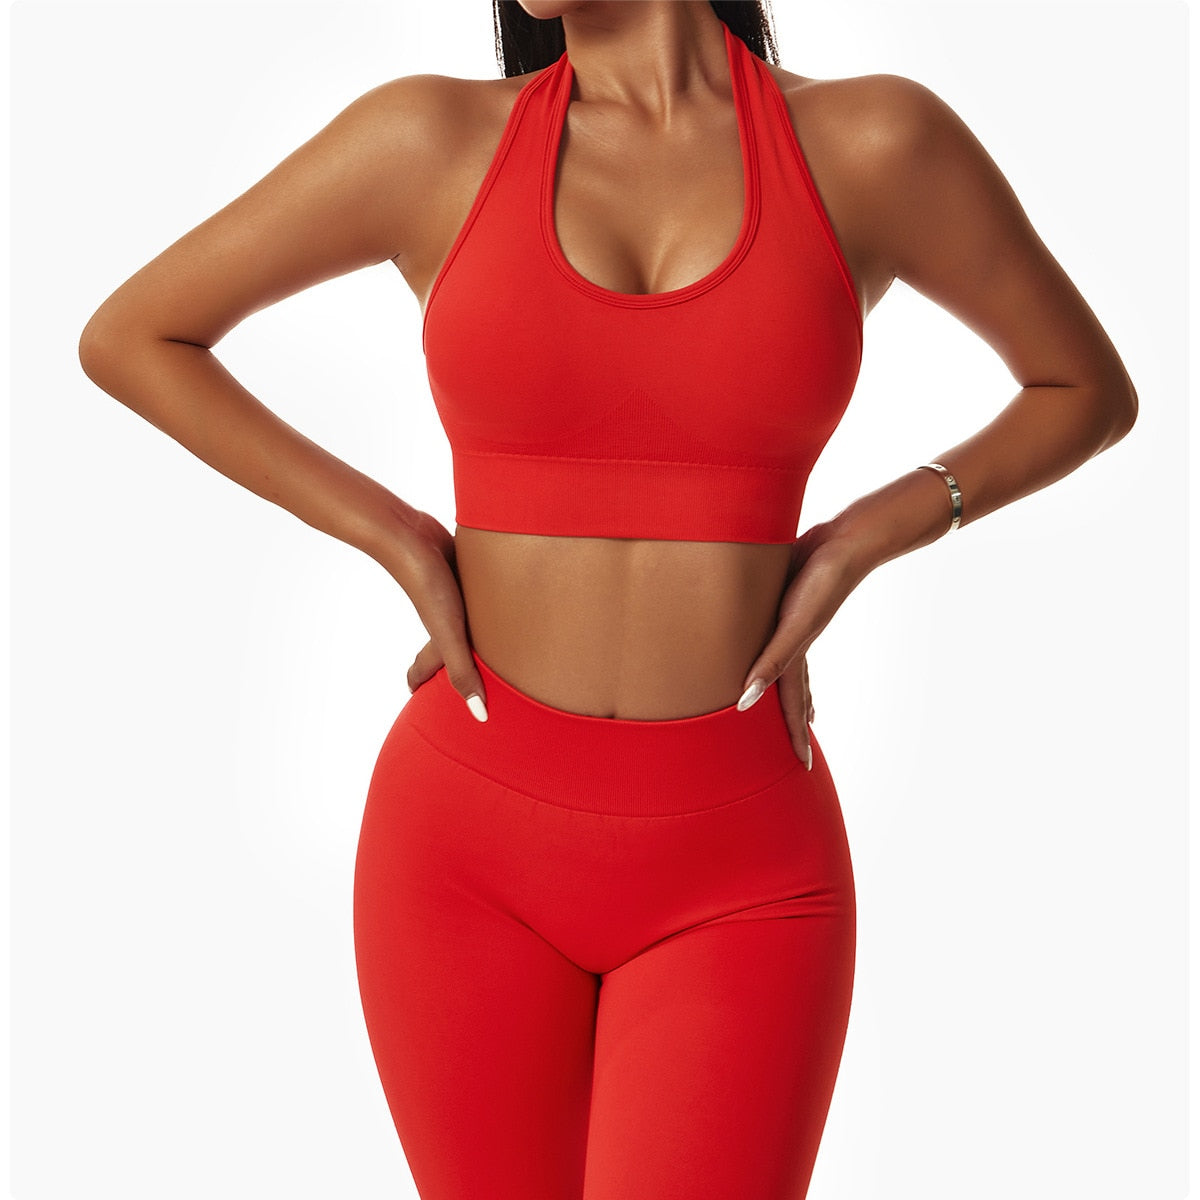 Seamless Women Sportswear Yoga Sets Workout Sports Bra Gym Clothing High Waist Legging Fitness Women Tracksuit Athletic Outfits The Clothing Company Sydney